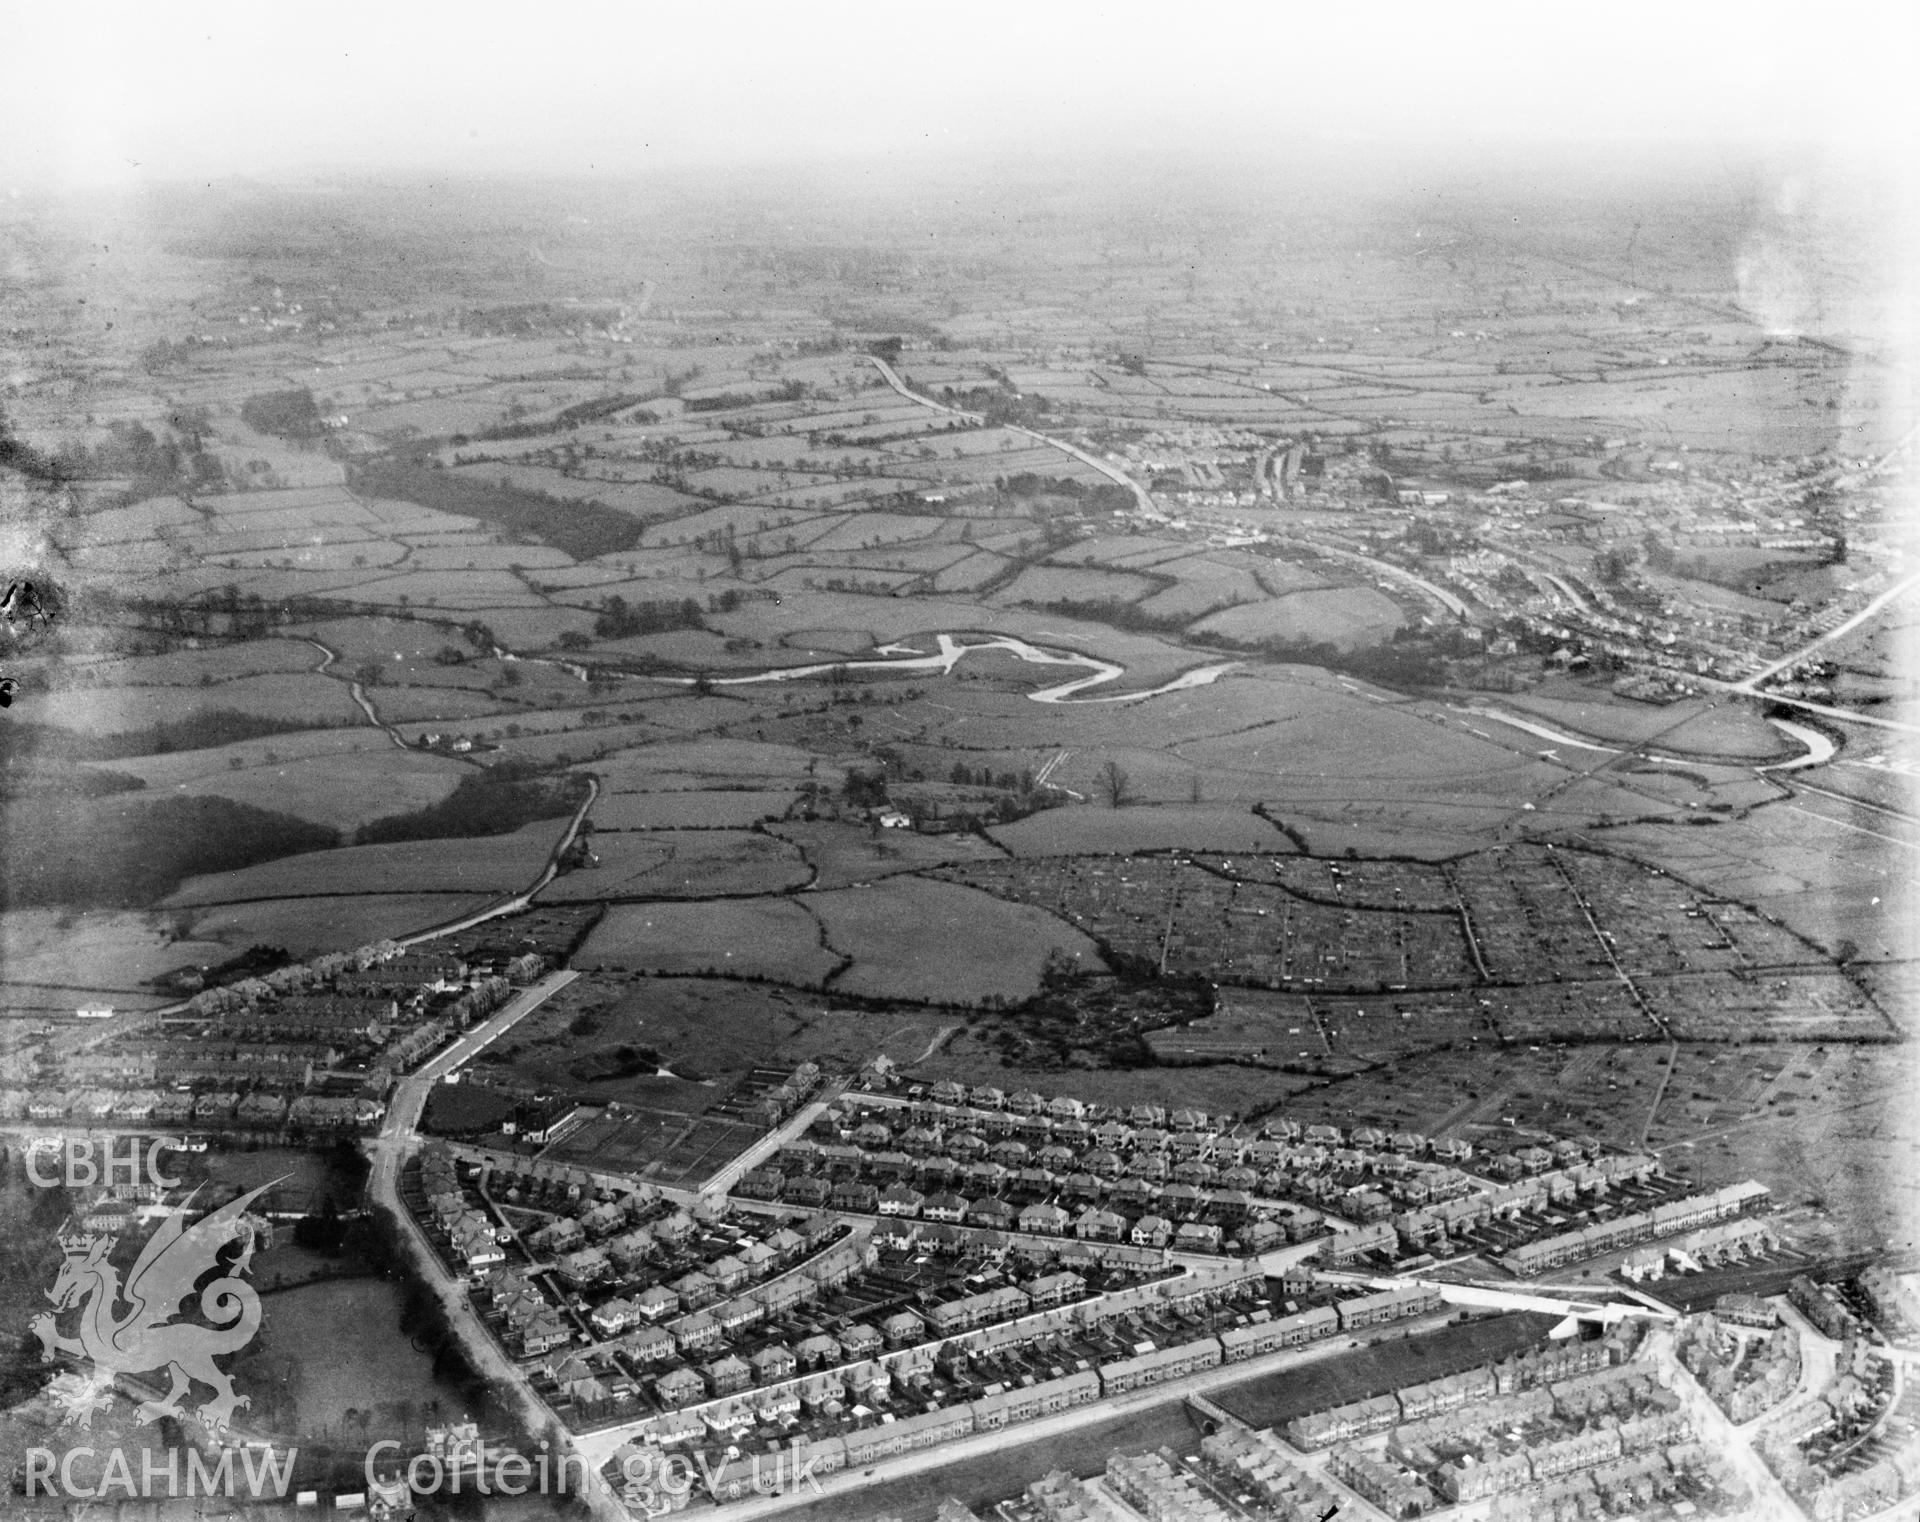 View of Cardiff showing the area near Rumney and Pengam Moor and allotment gardens, oblique aerial view. 5?x4? black and white glass plate negative.